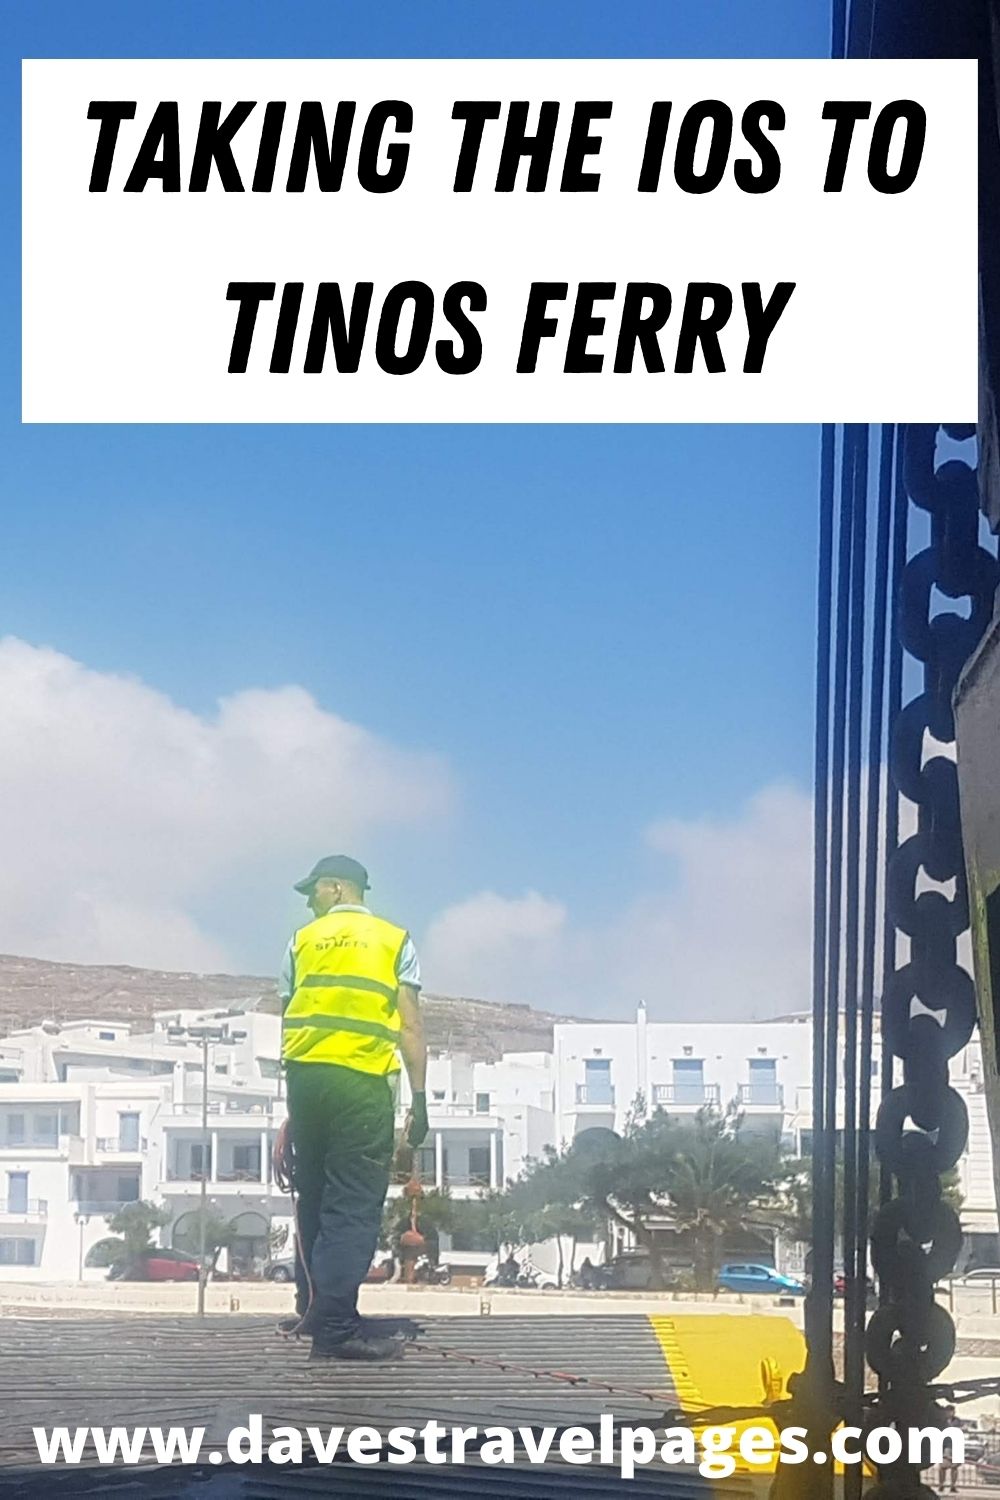 Taking the Ios to Tinos ferry in Greece